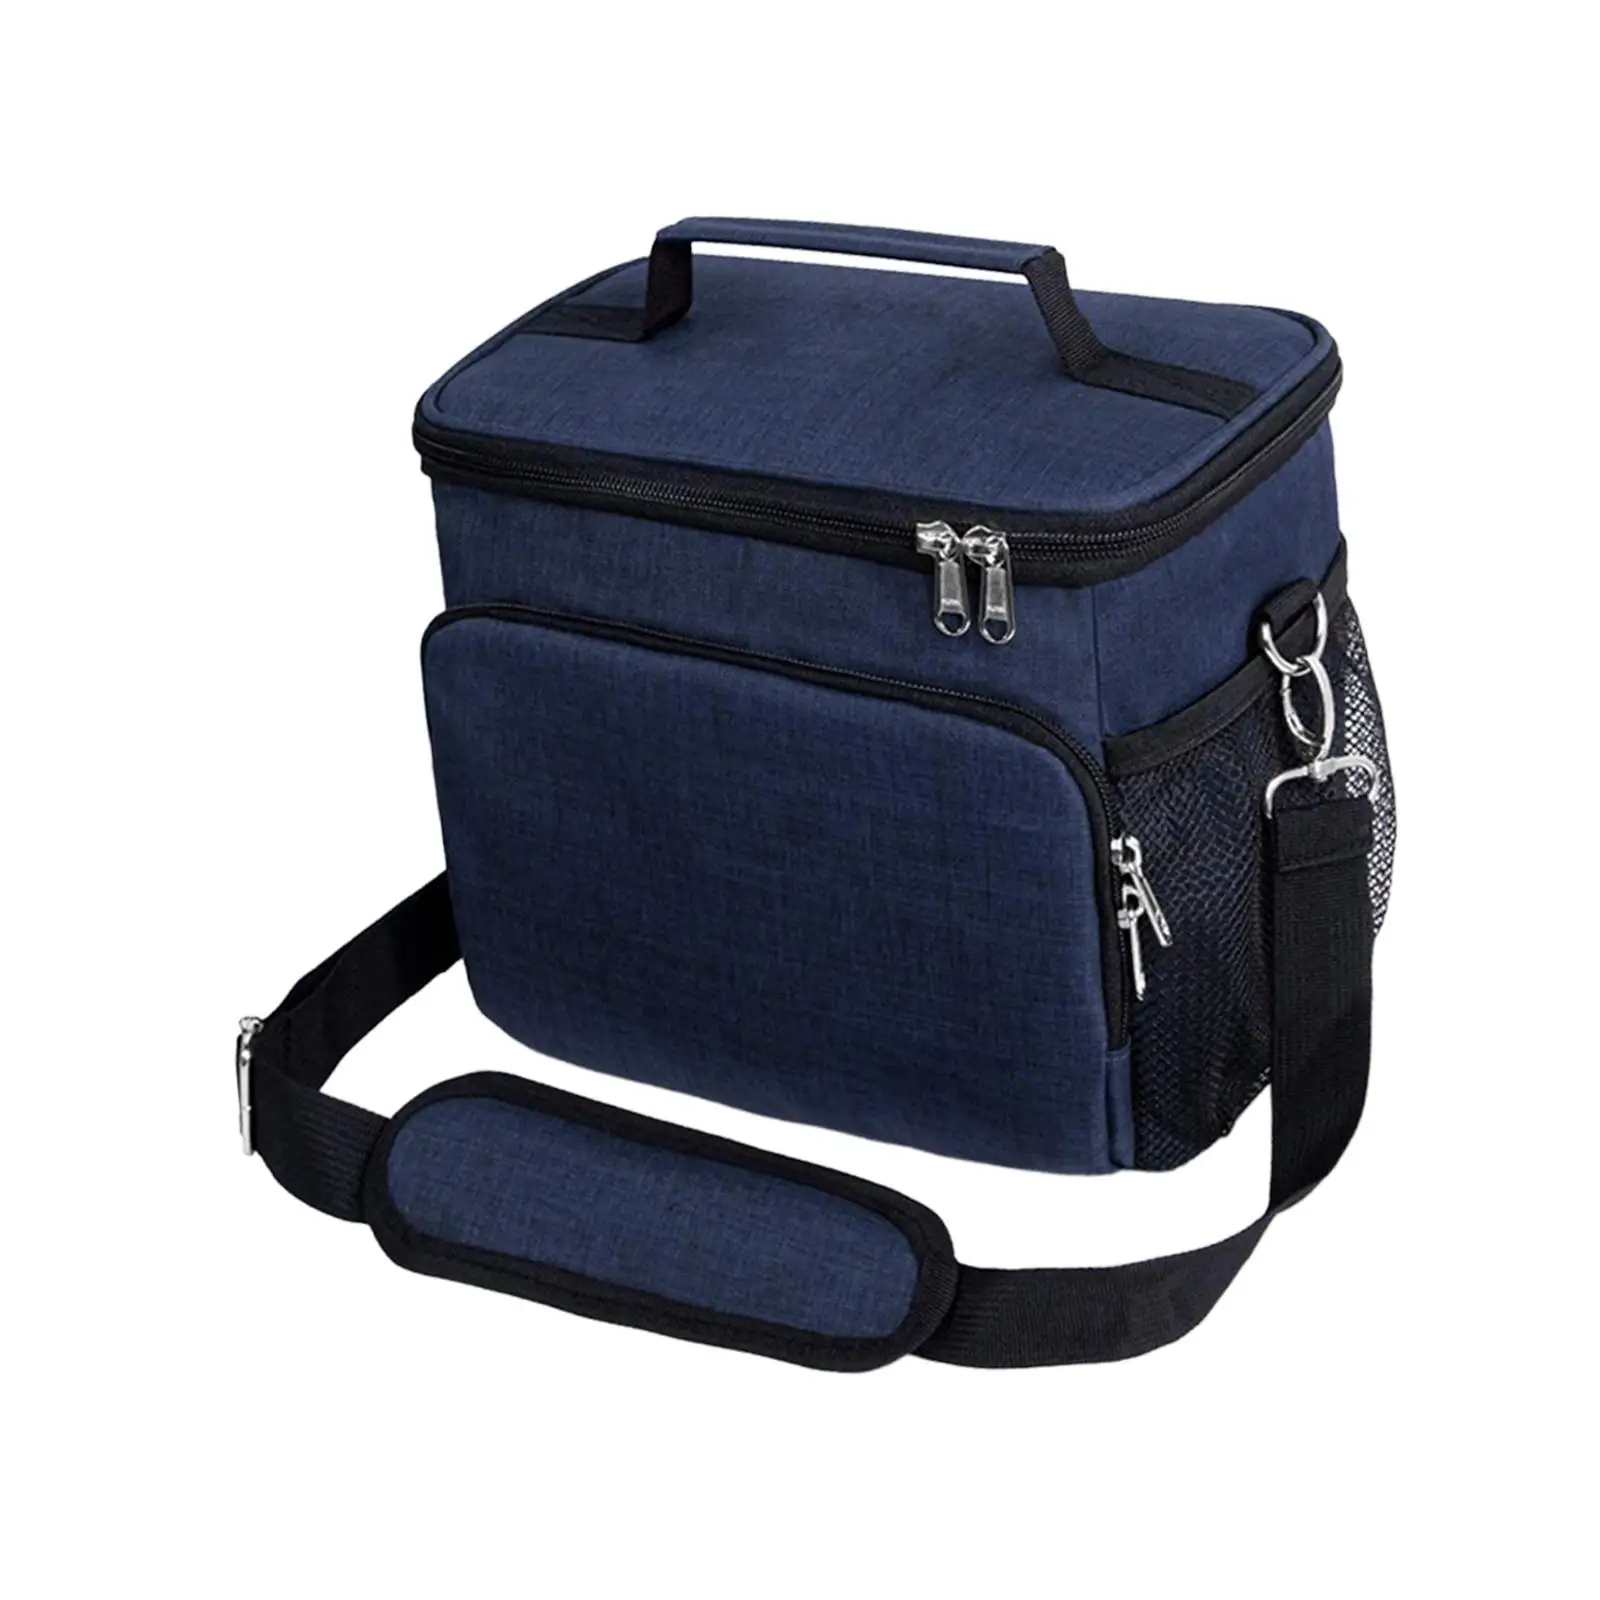 Lunch Bag with Adjustable Shoulder Strap Portable for Fishing Camping Travel